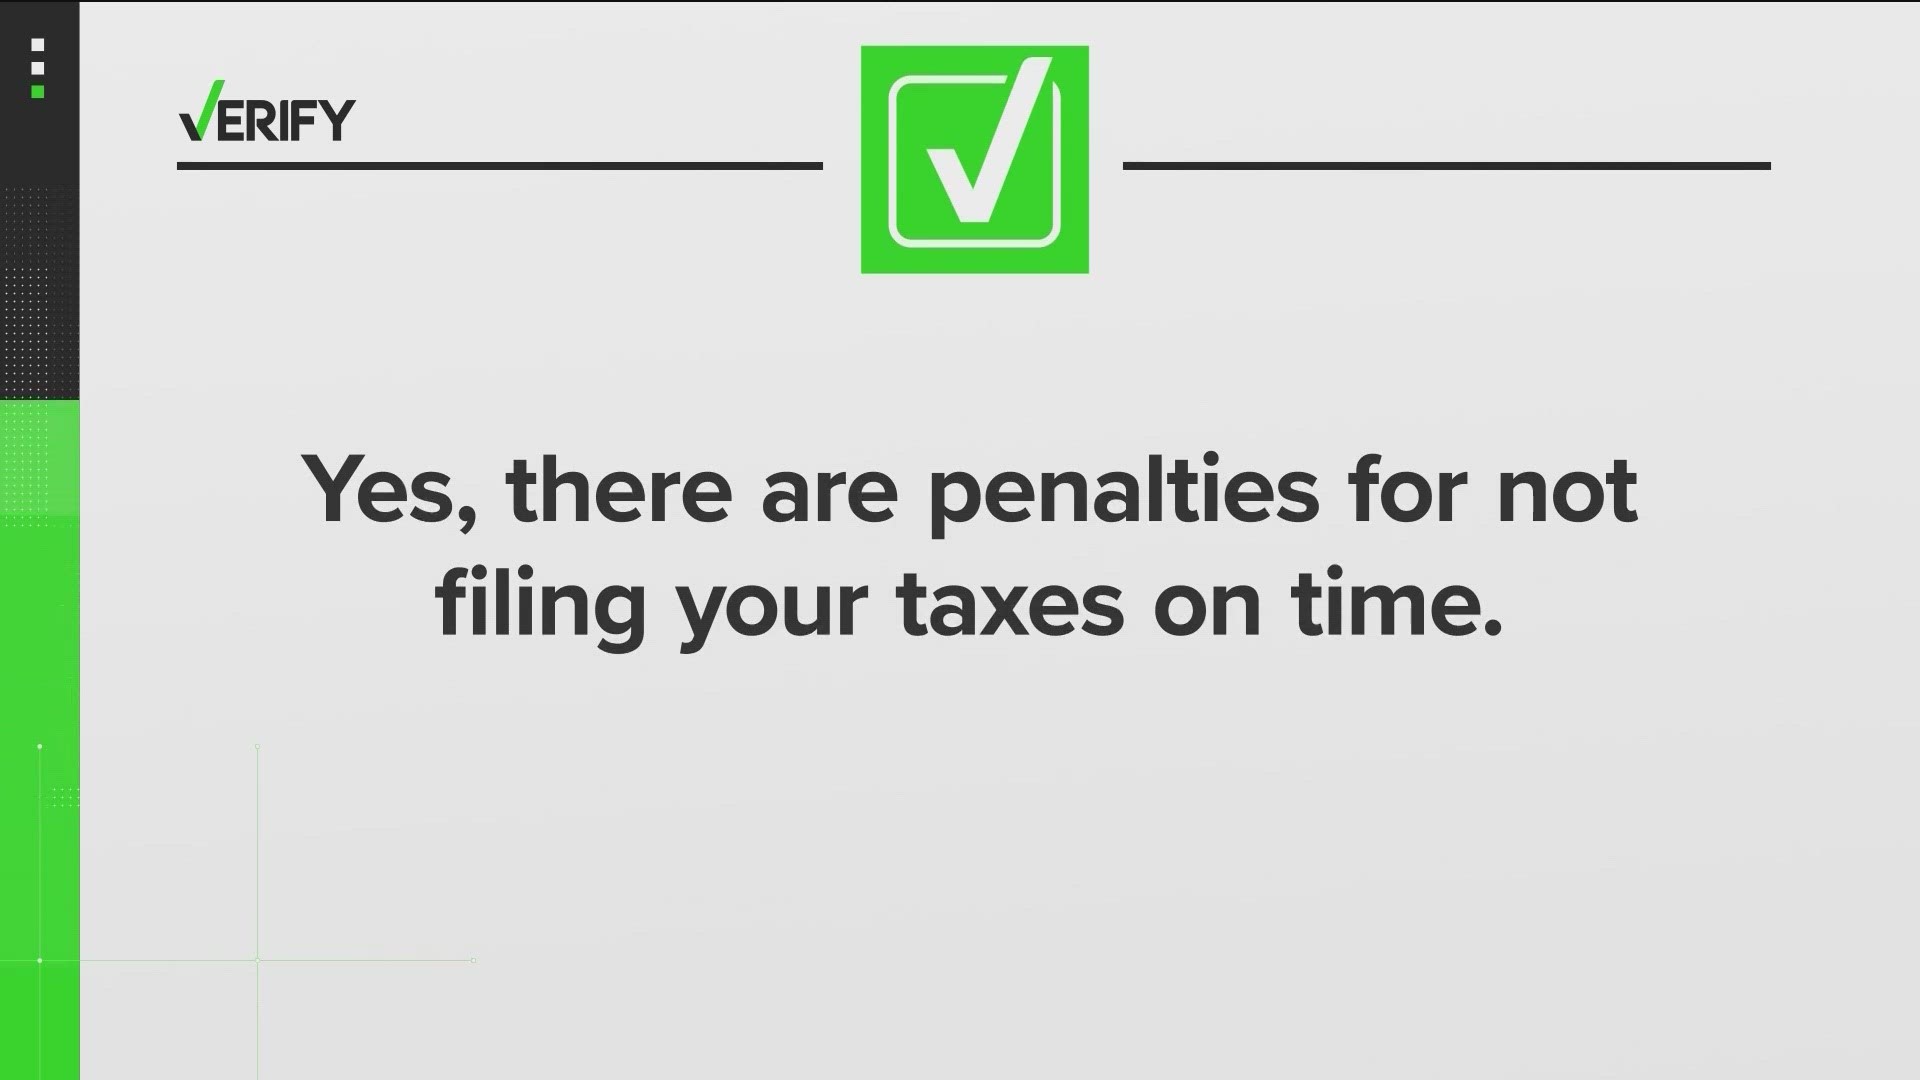 If you haven't already filed your taxes, you only have a few days left to do it. But what happens if you don't? Our VERIFY team looked into it.